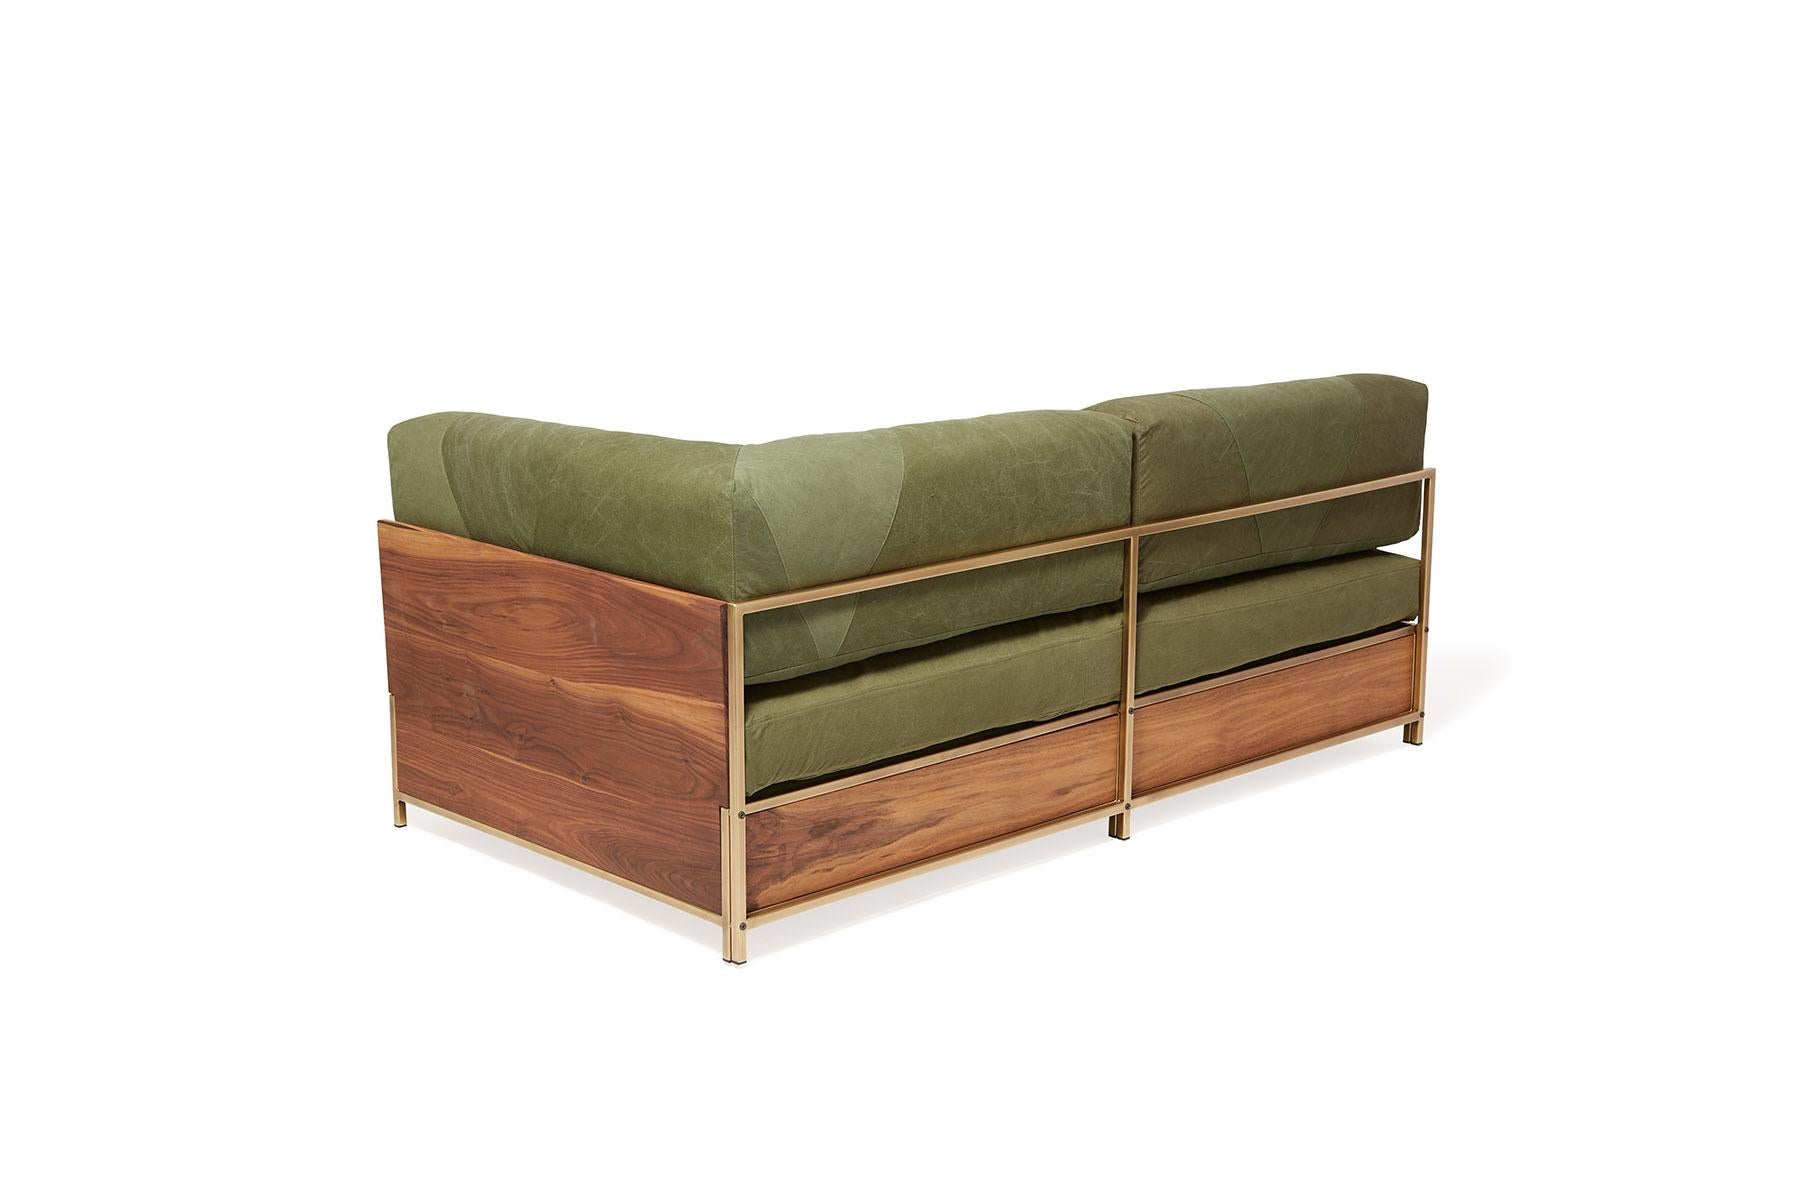 Vintage Military Canvas Guest Bed Sofa with Storage Drawers For Sale 2